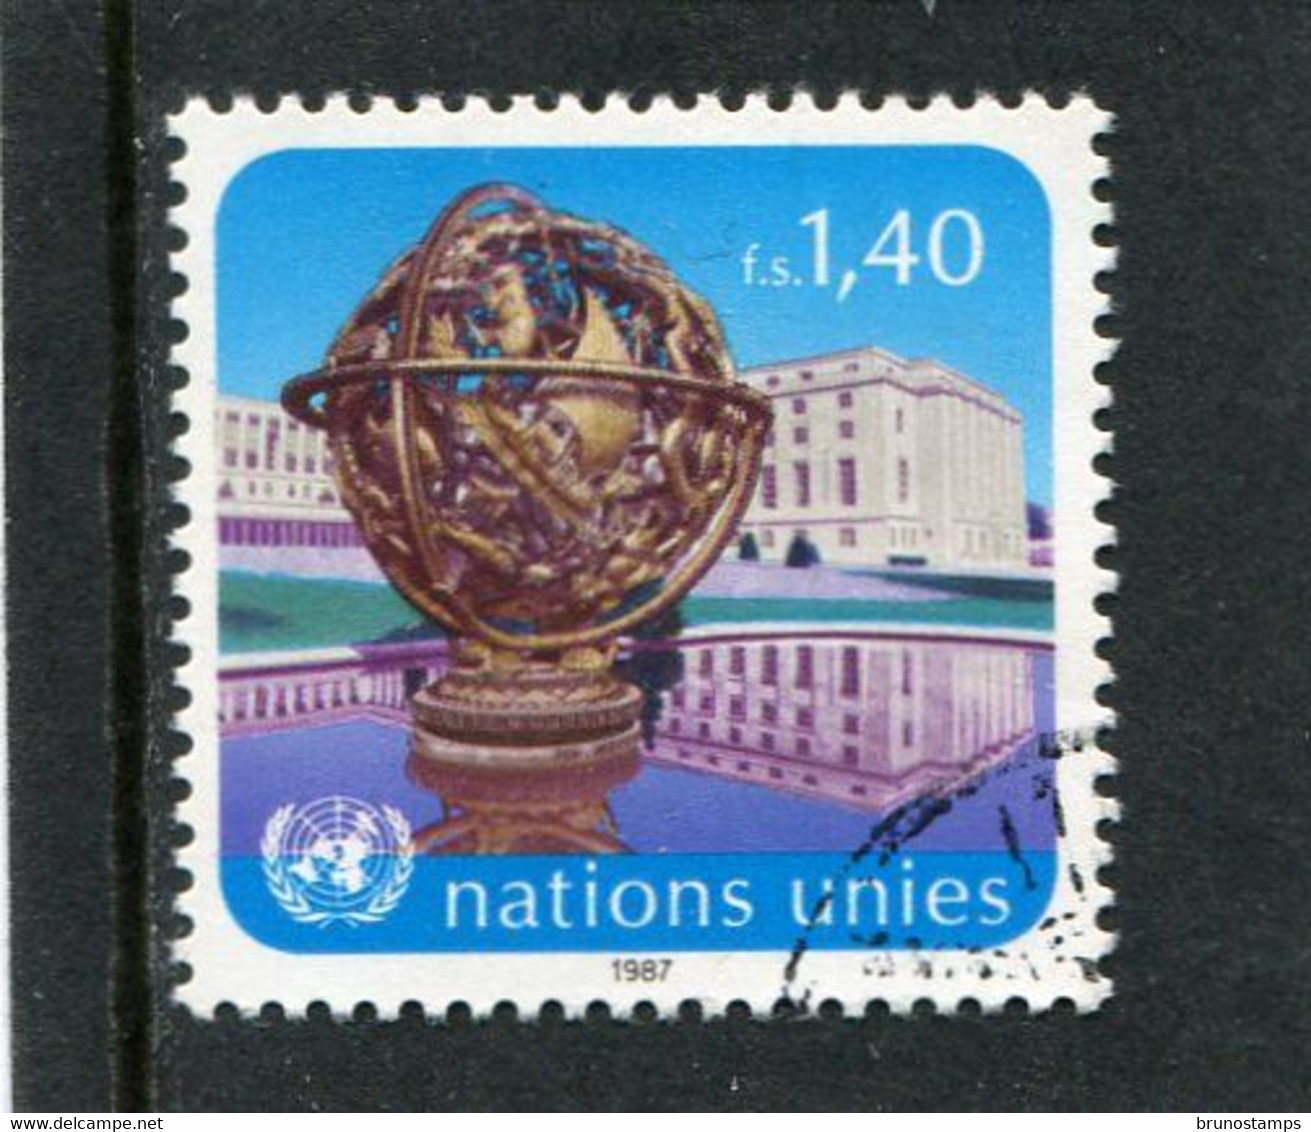 UNITED NATIONS - GENEVE  -  1987  1.40 F.  DEFINITIVE  FINE USED - Gebraucht